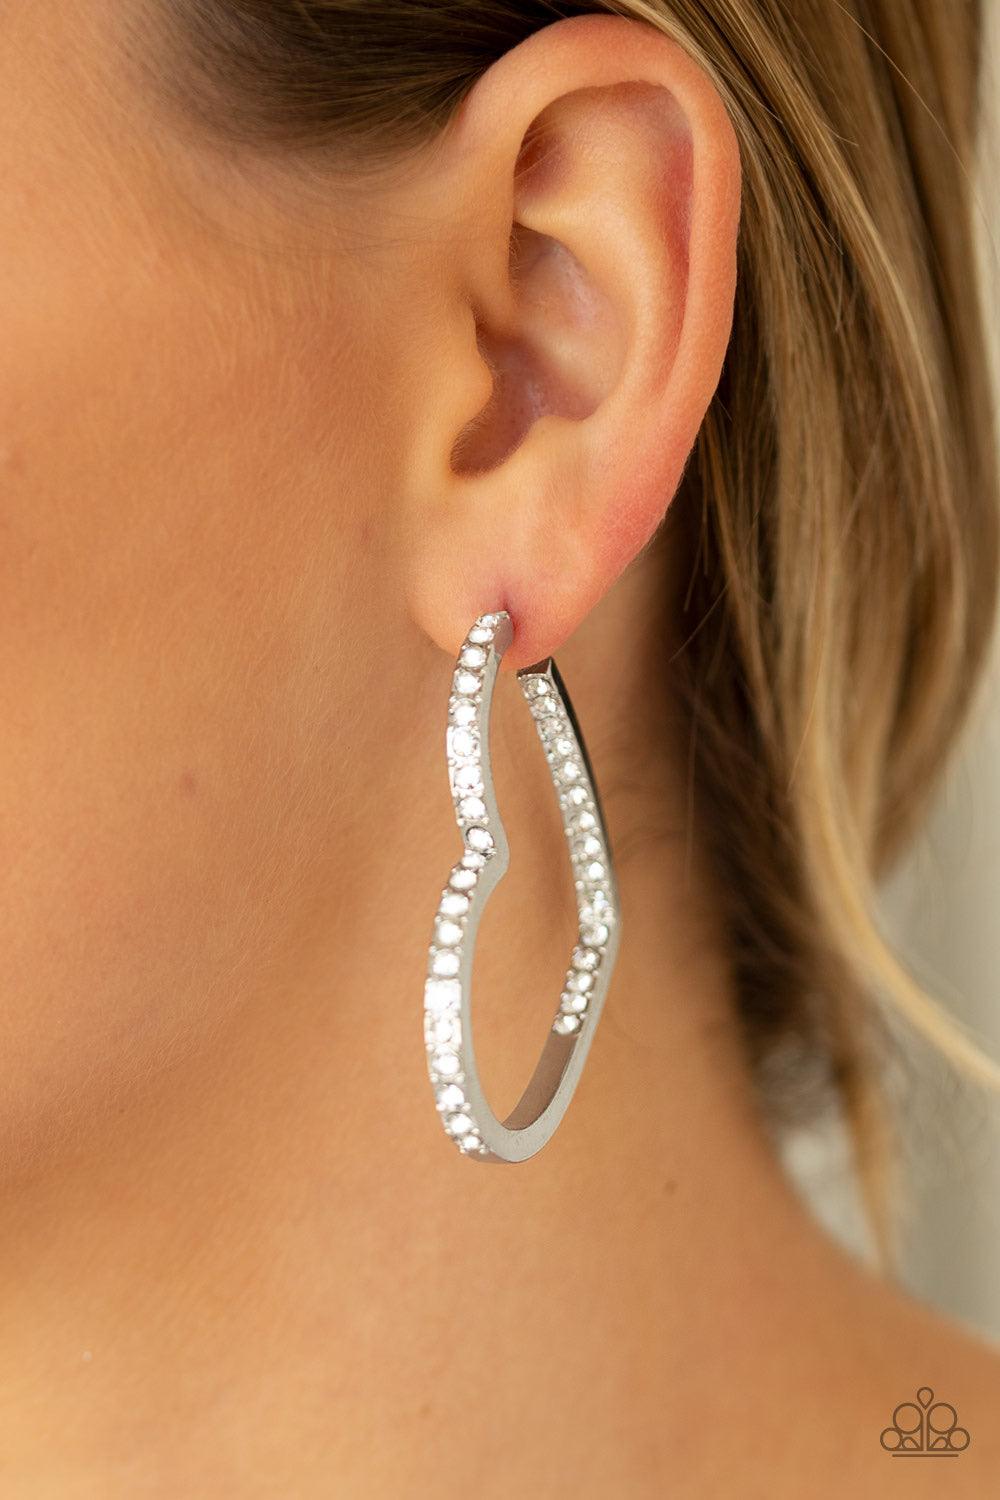 Paparazzi Accessories Heartbreaker - White Encrusted in sections of glittery white rhinestones, a glistening silver hoop curls into a charming heart shape for a heart-stopping look. Earring attaches to a standard post fitting. Hoop measures approximately